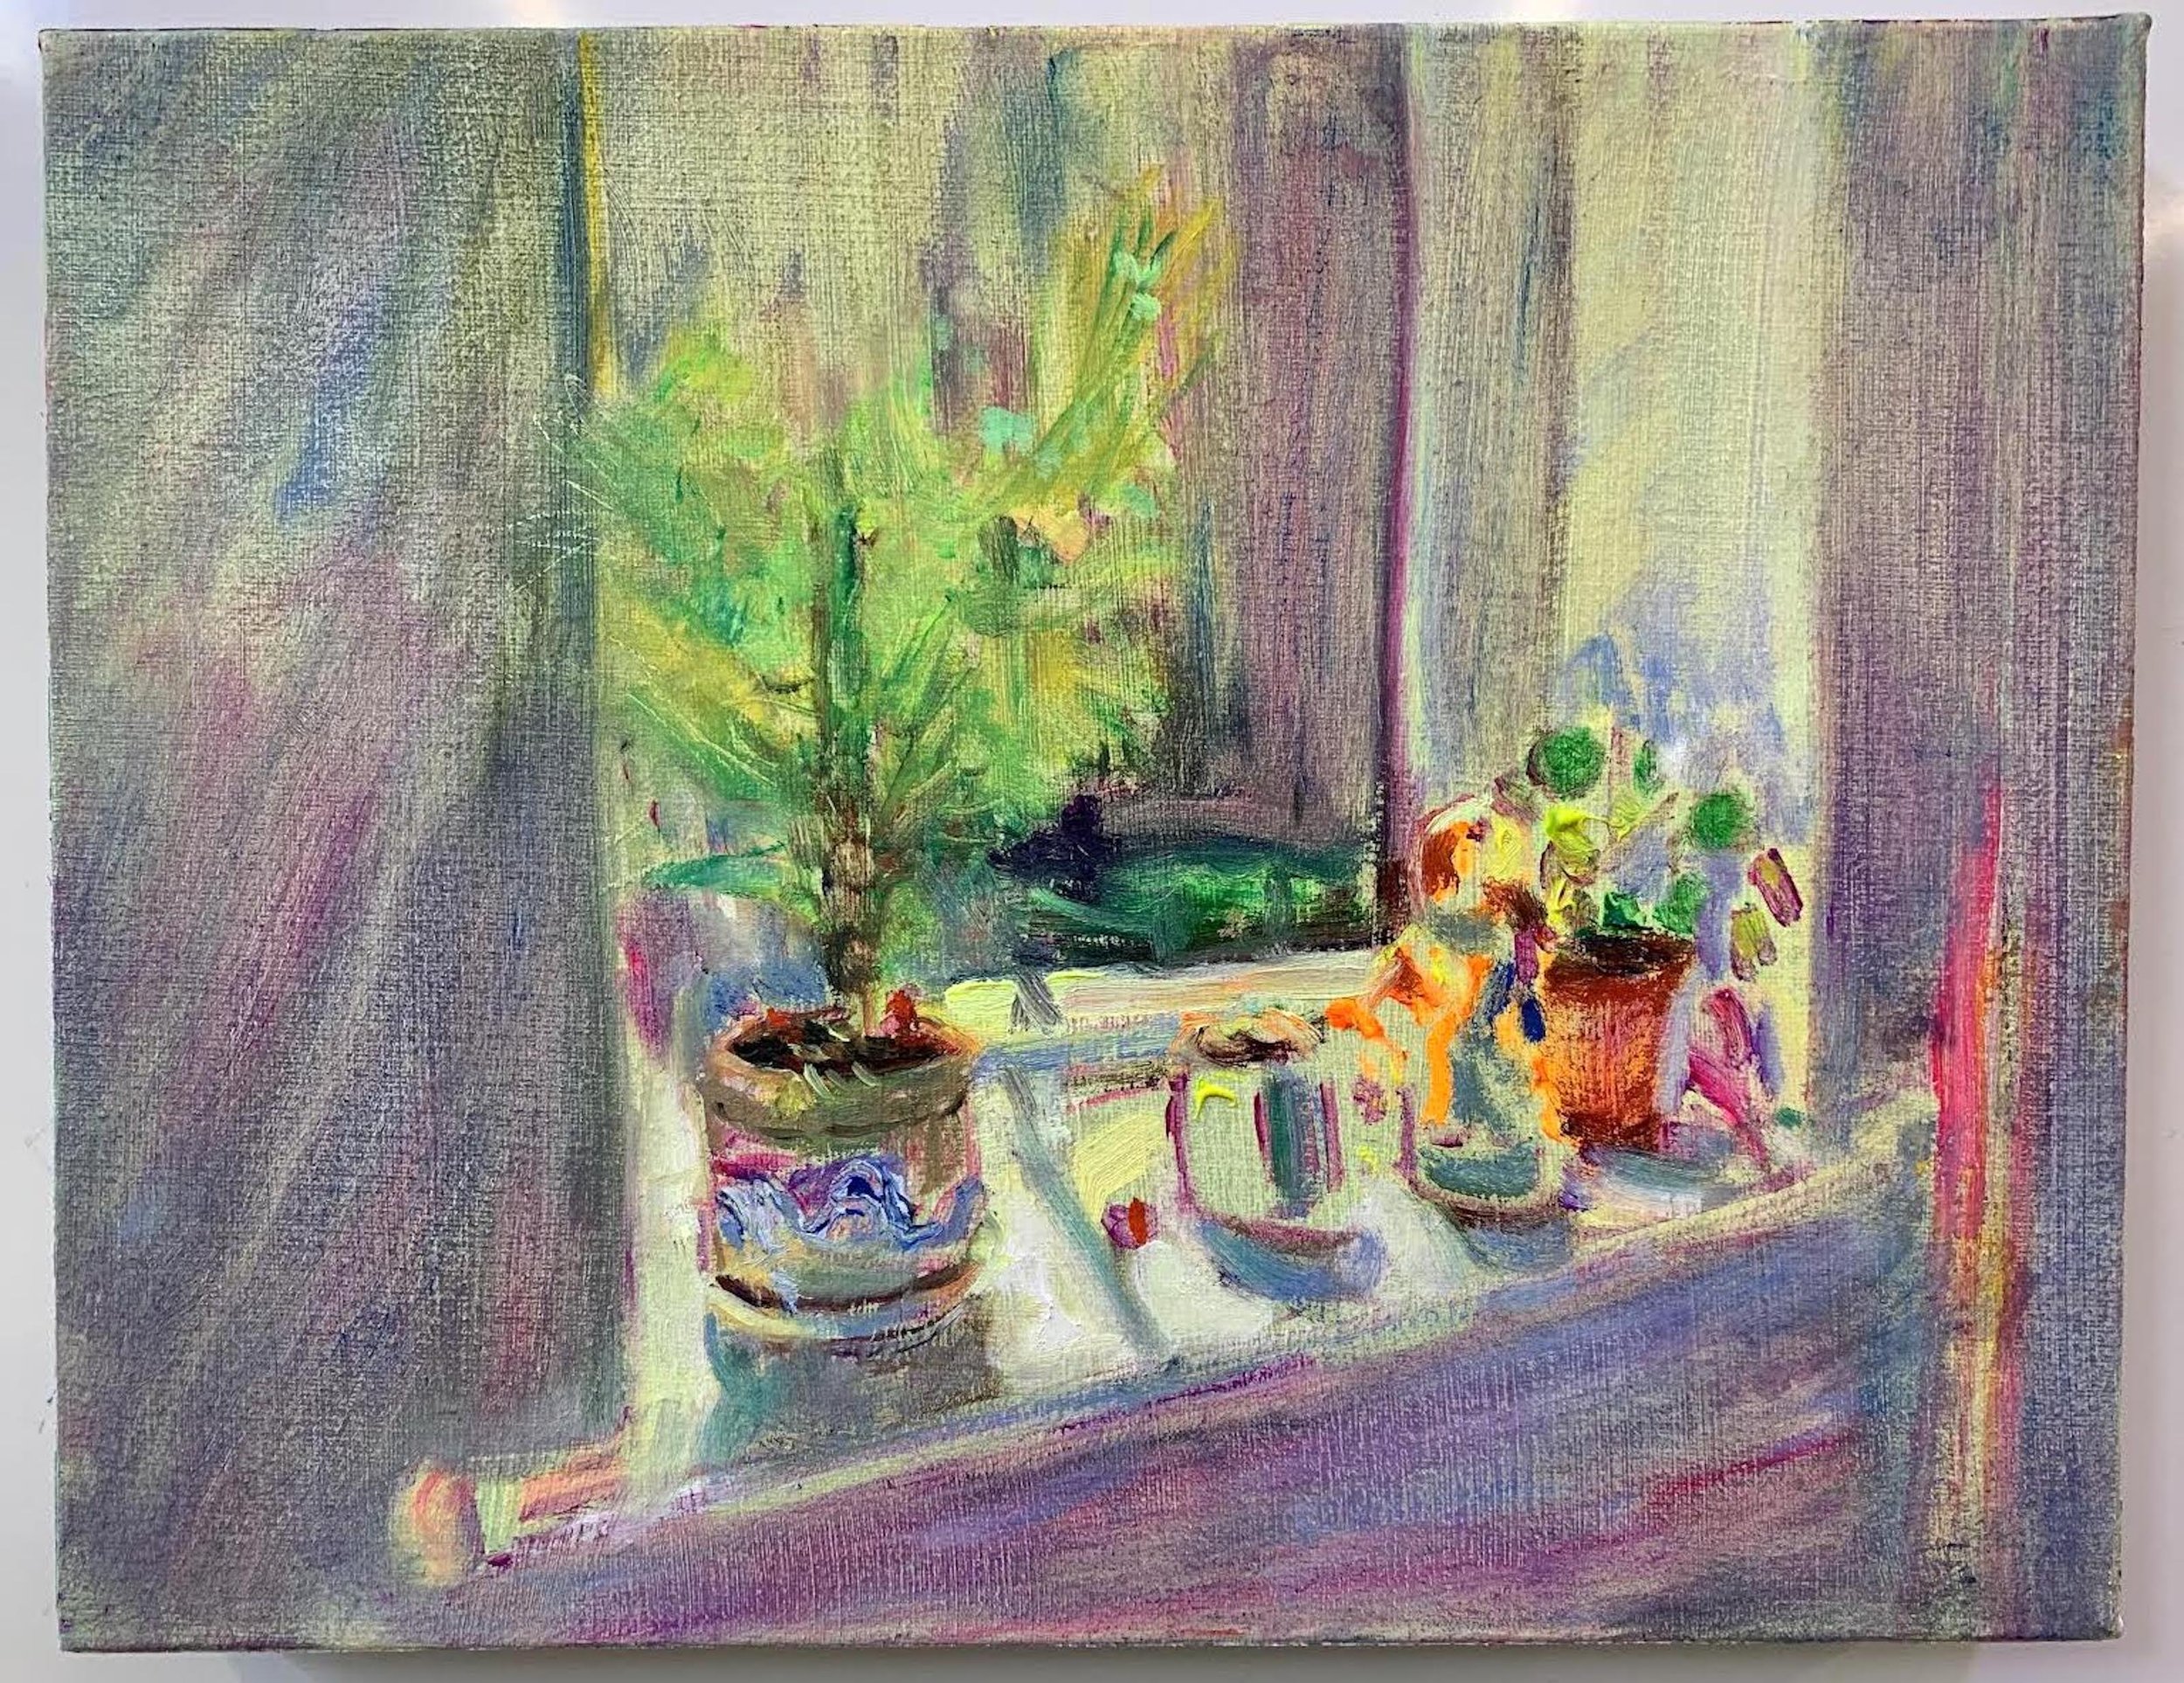  Window Sill, 2022  Oil on linen  11 x 14 inches 